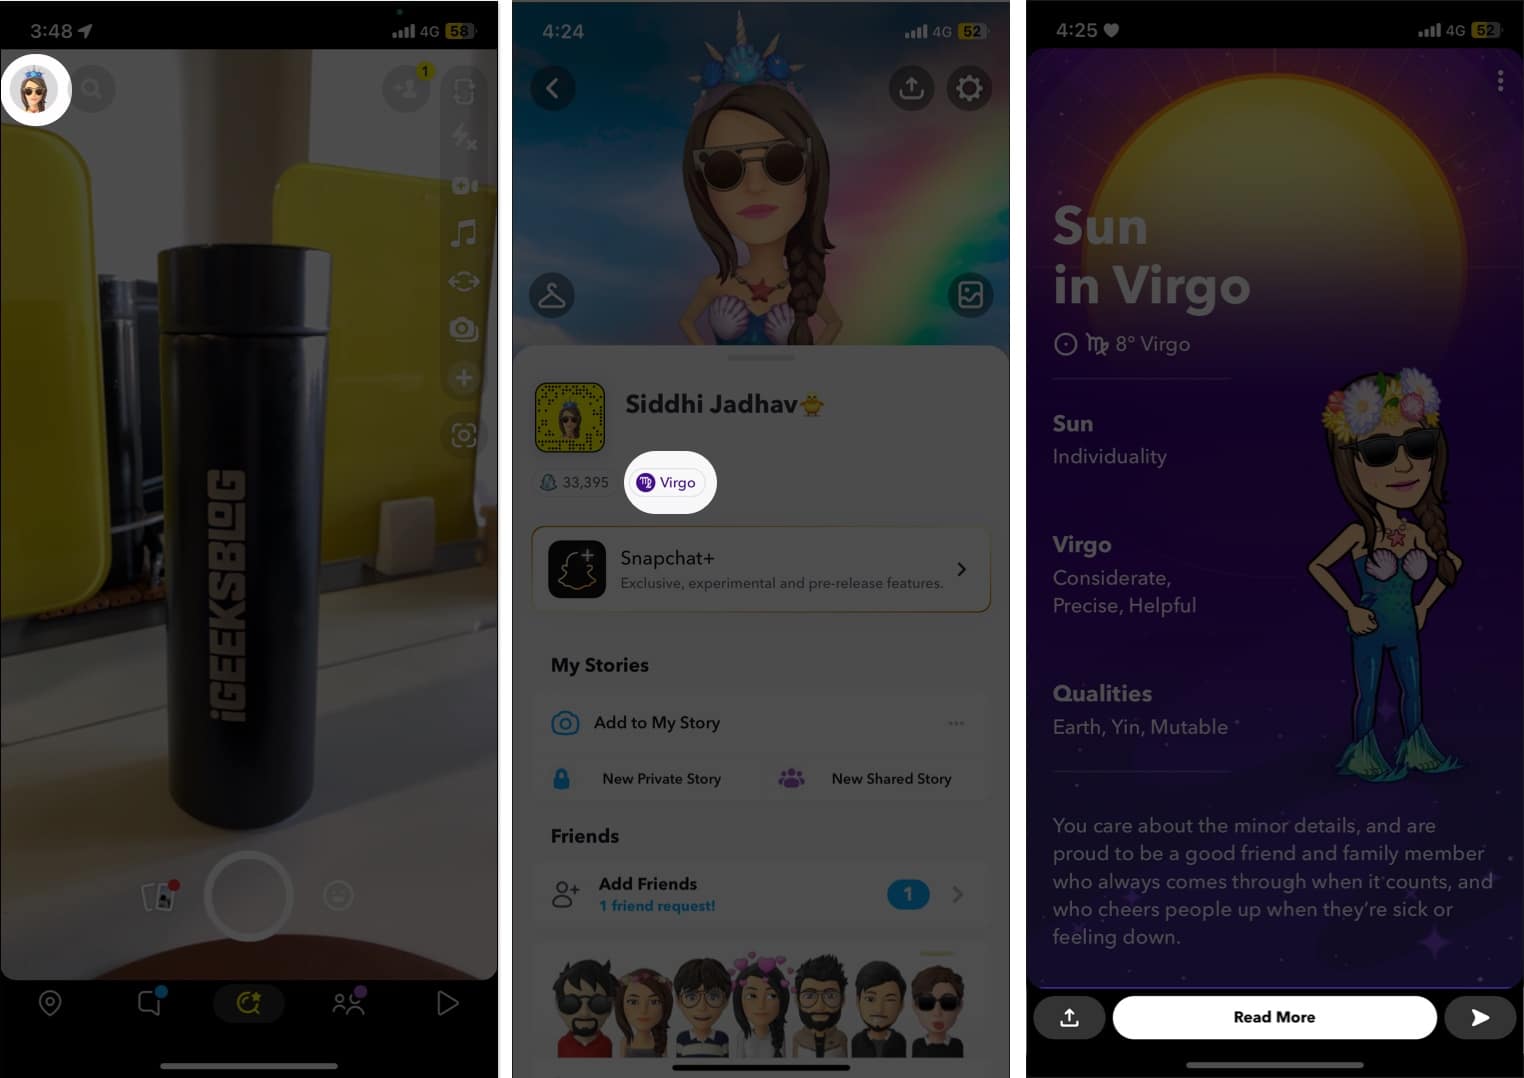 How to use Friendship Profiles in Snapchat on iPhone or Android - 47